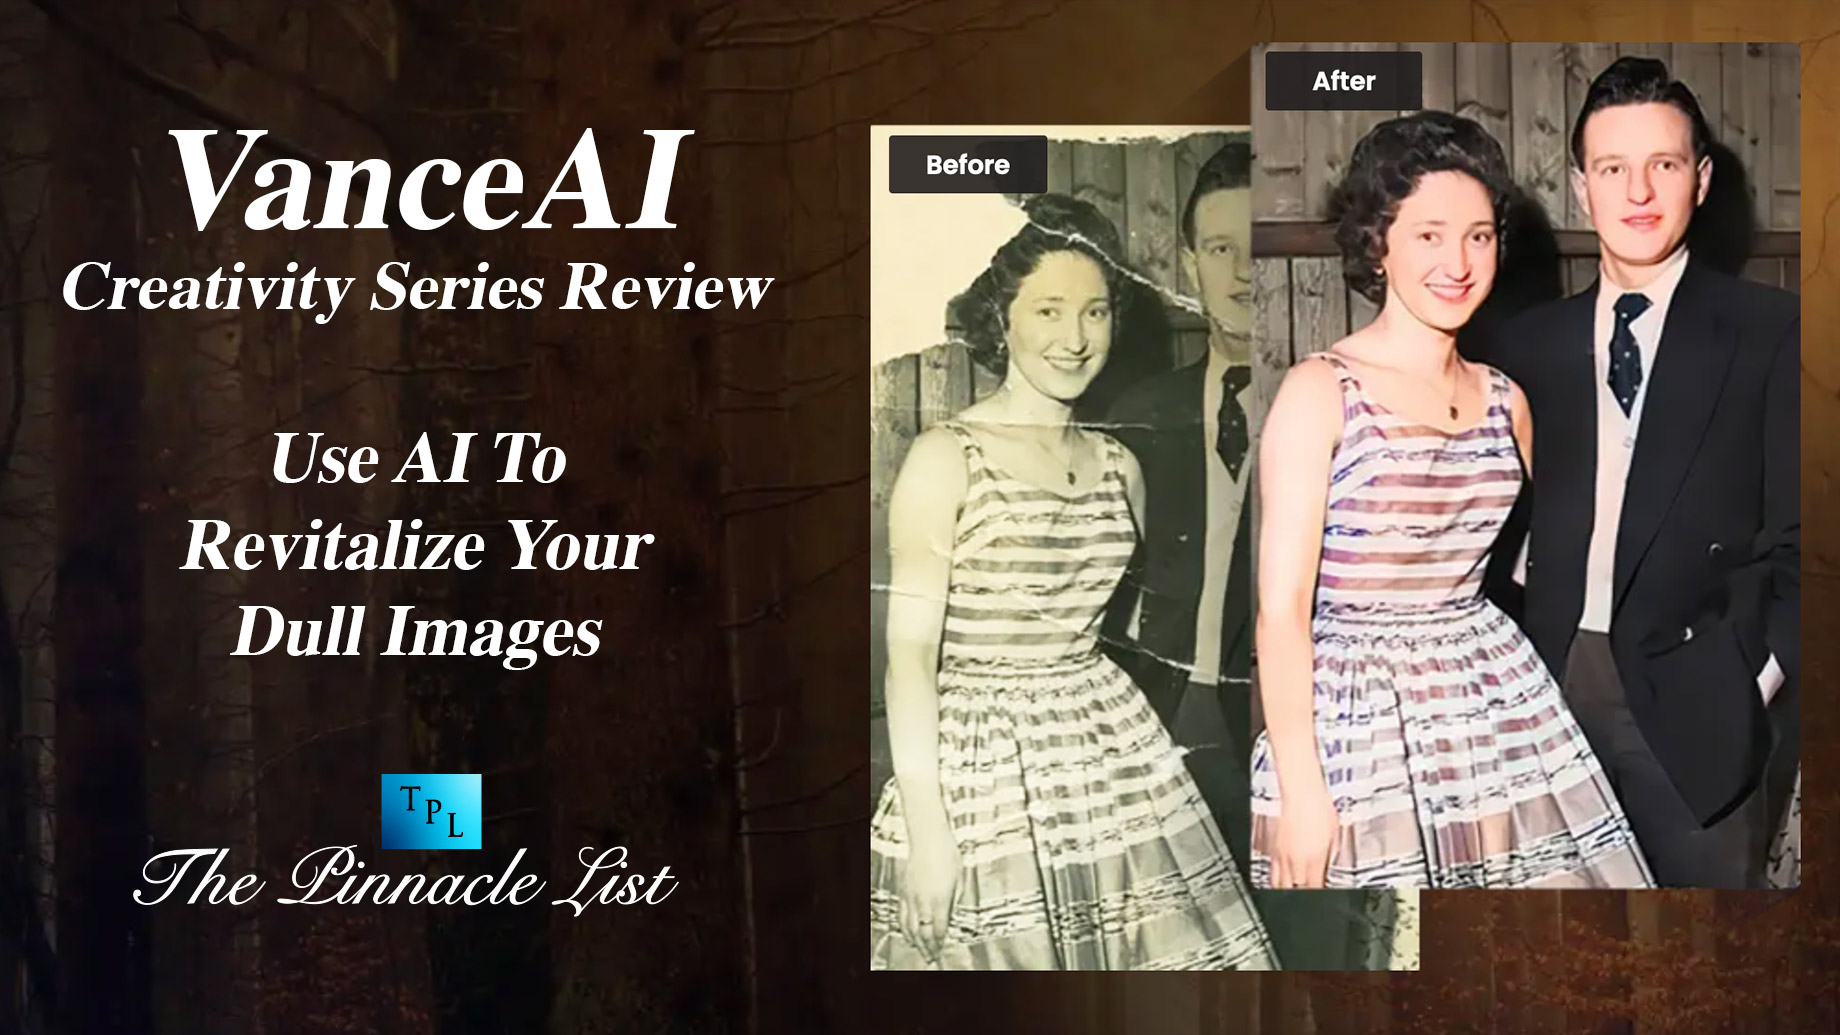 VanceAI Creativity Series Review: Use AI To Revitalize Your Dull Images